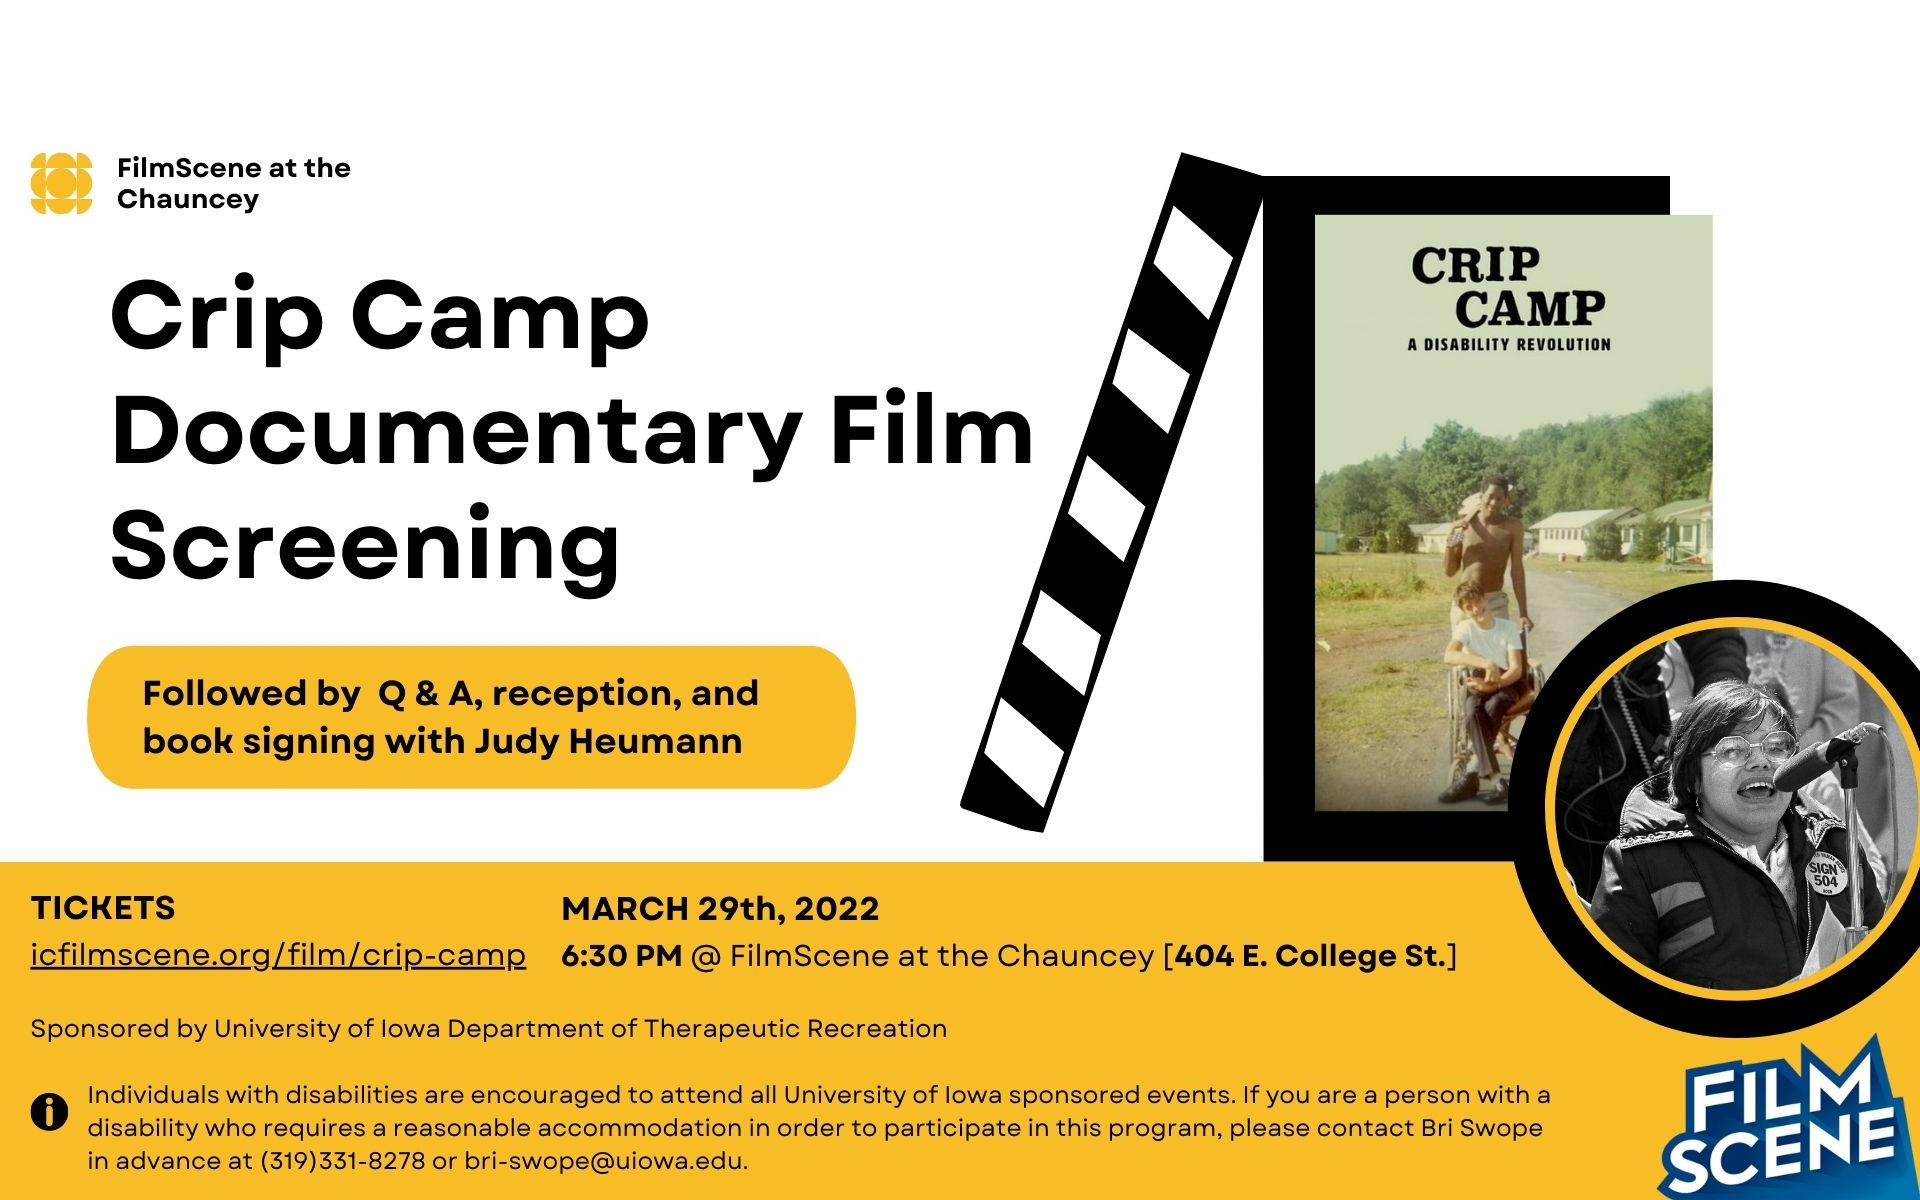 Judy Heumann appearing at Crip Camp film screening on March 29